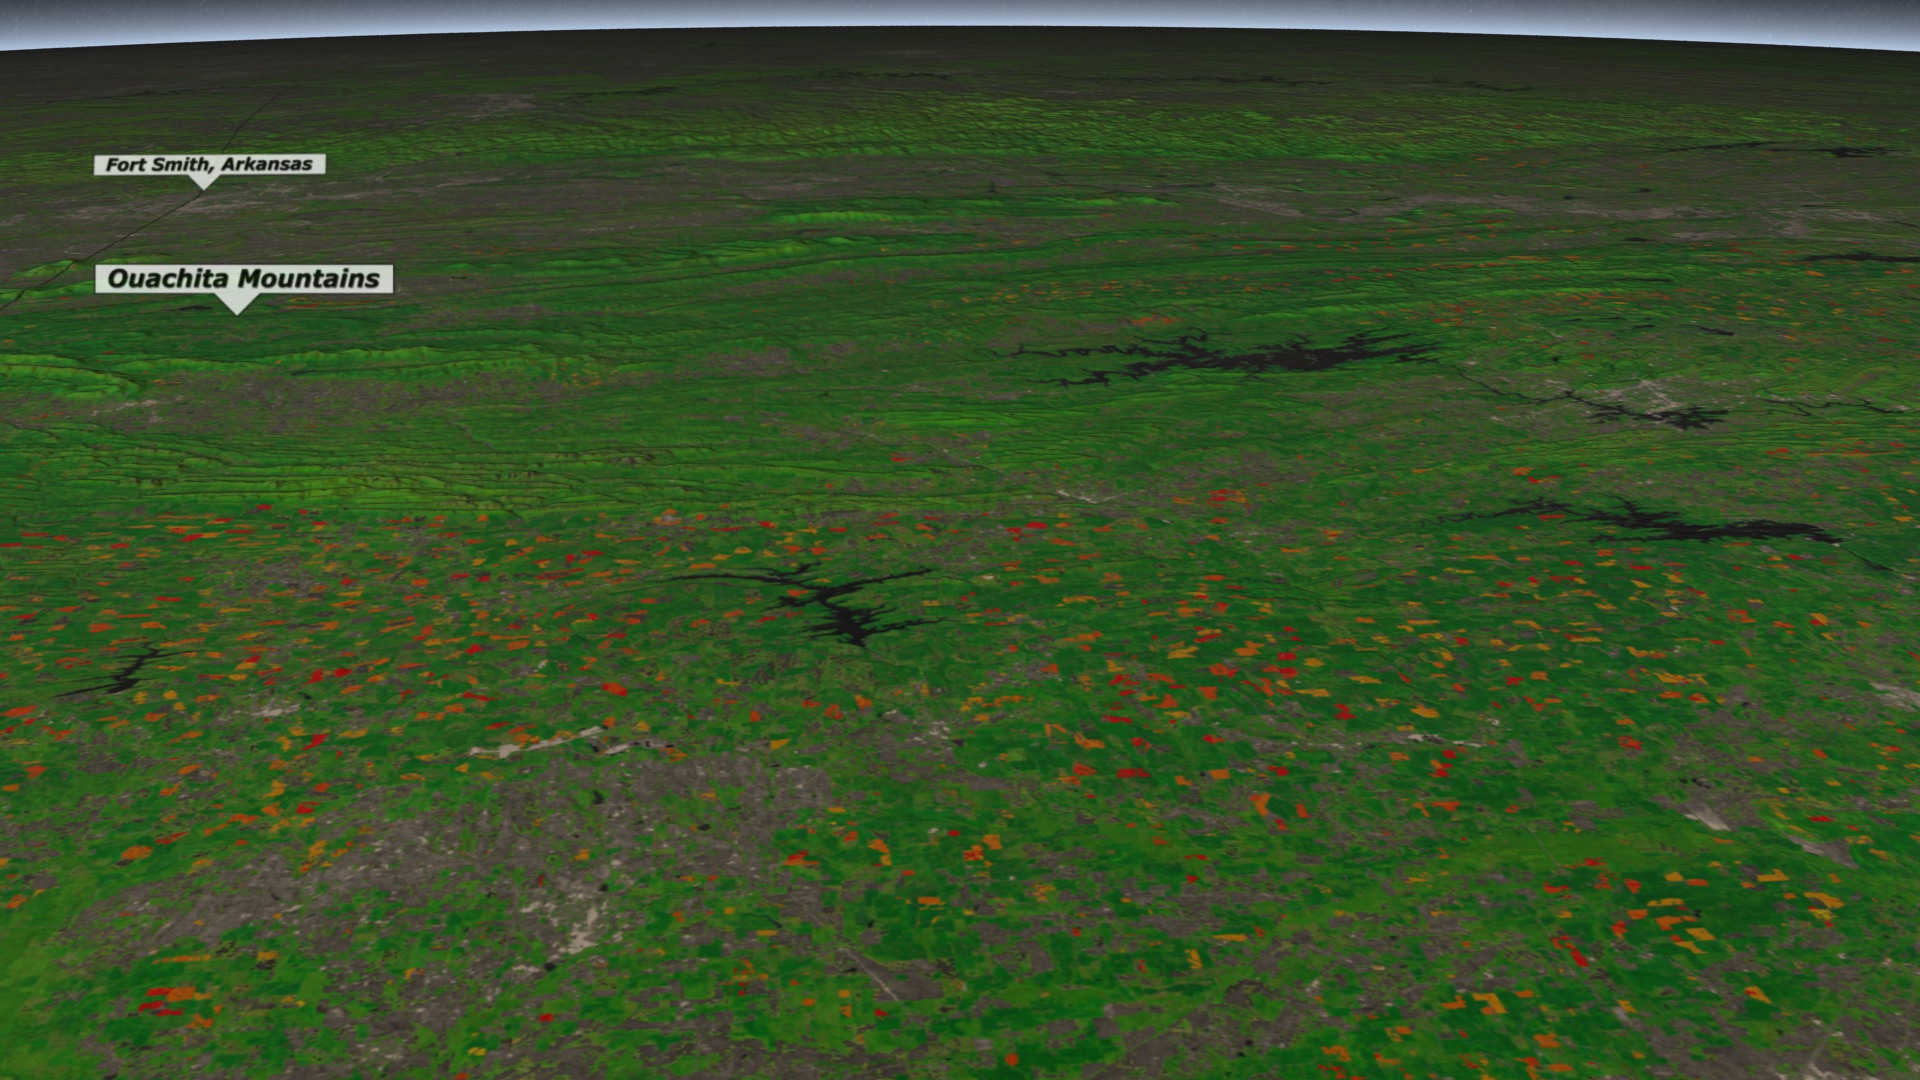 Animation that flys over the Ouachita Mountain range from east to west showing large areas of vegetation change south of the mountains (depicted in shades of orange and red).